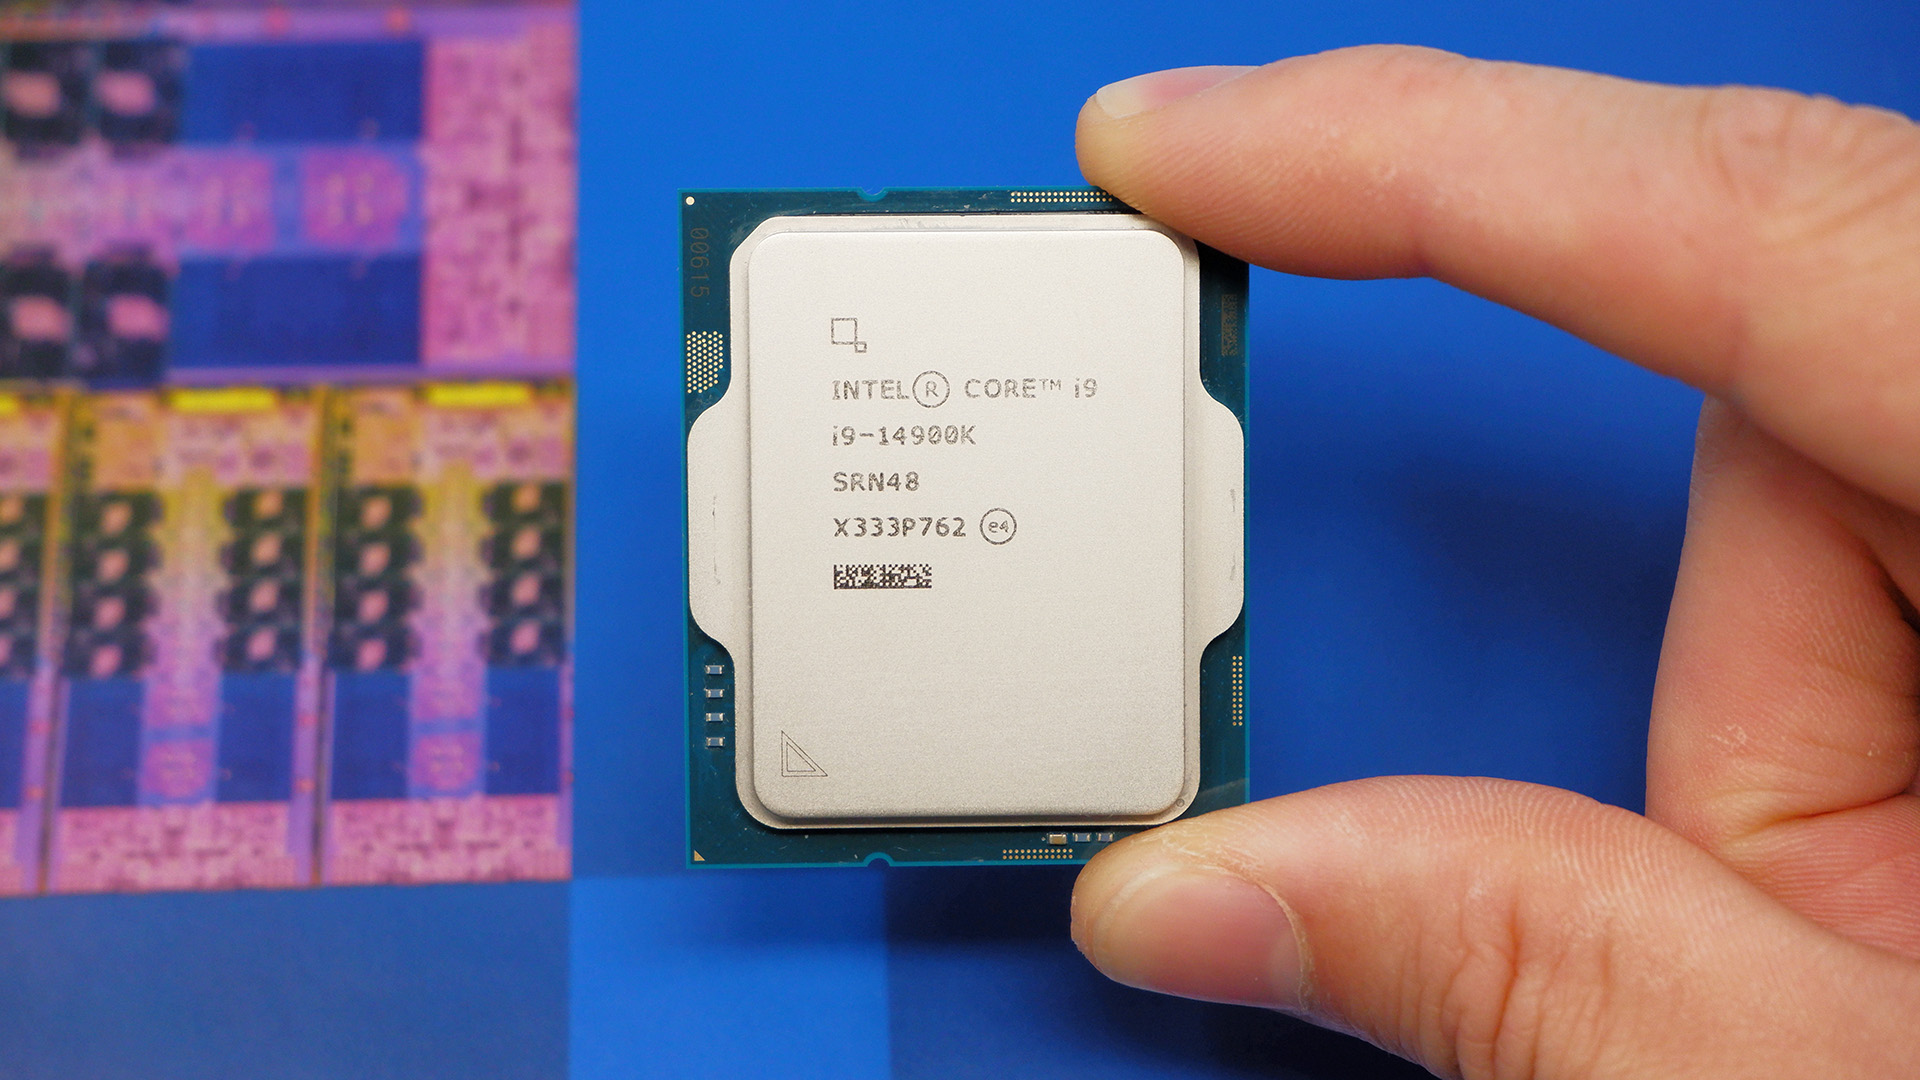  Intel found a bug in its high-end CPU microcode is 'potentially contributing to instability' though 'is not the root cause' of those long-reported game crashes 